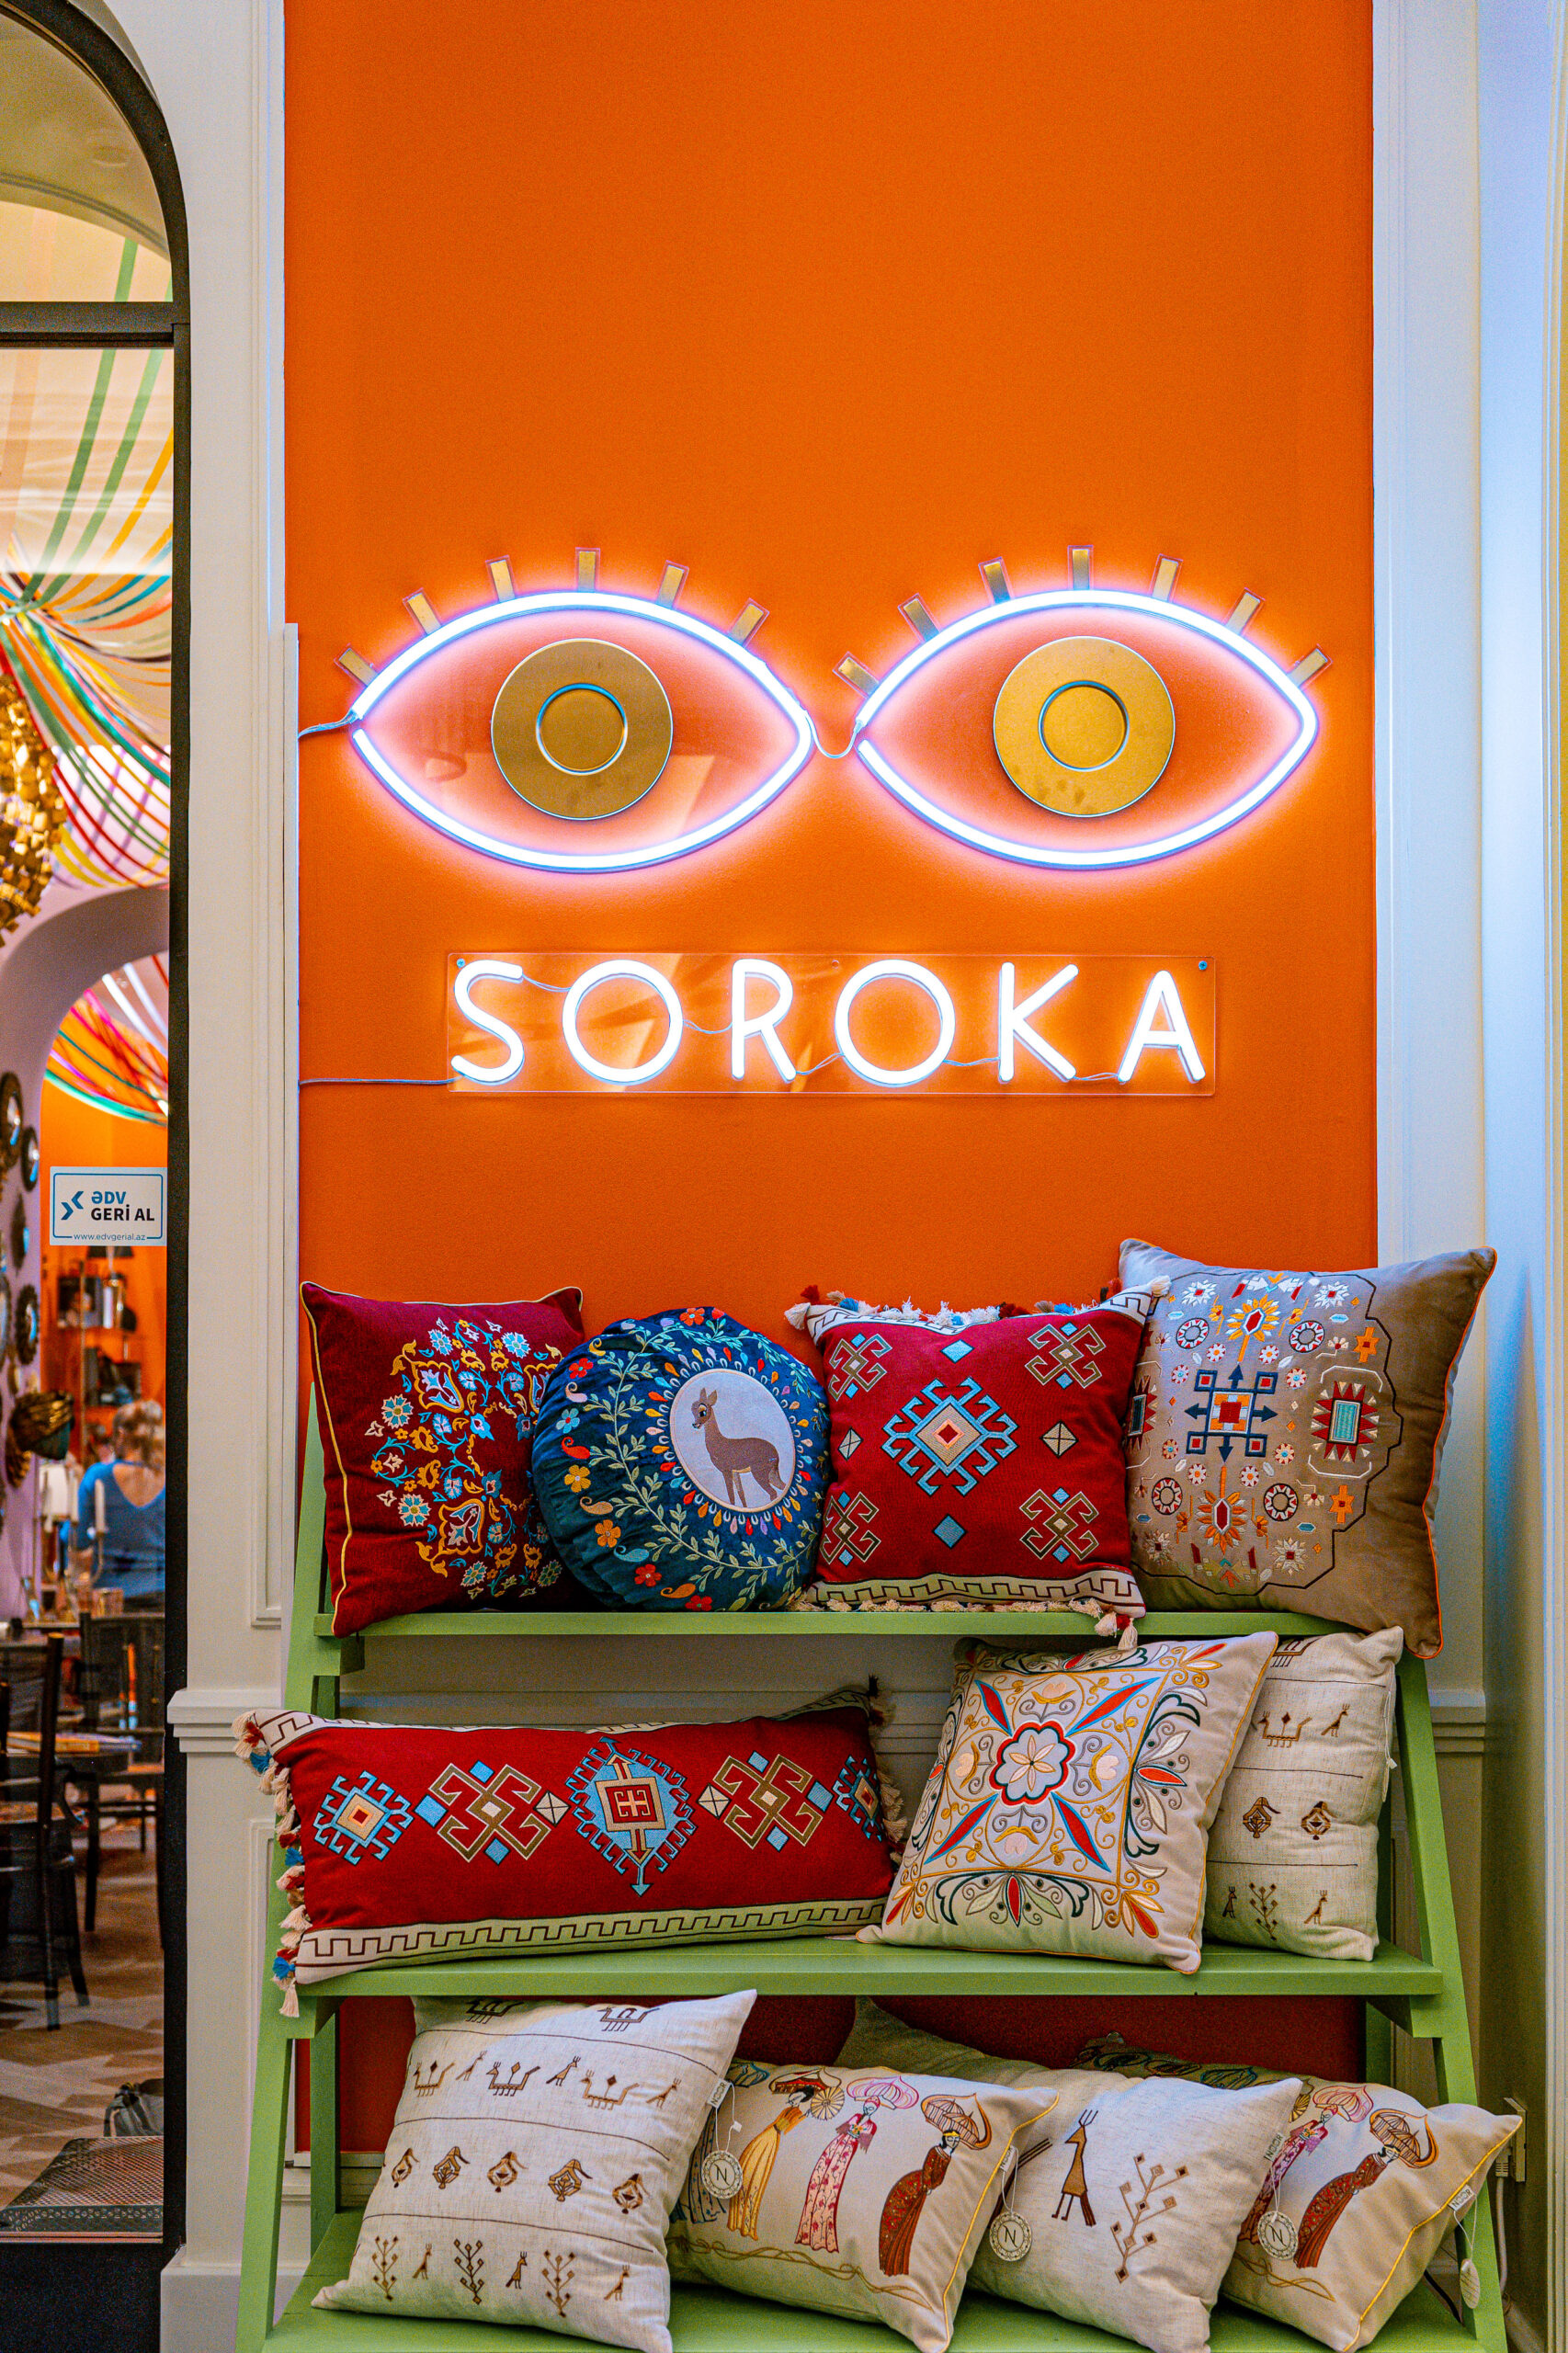 An orange wall with light up eyes on the wall and pillows on a green shelf